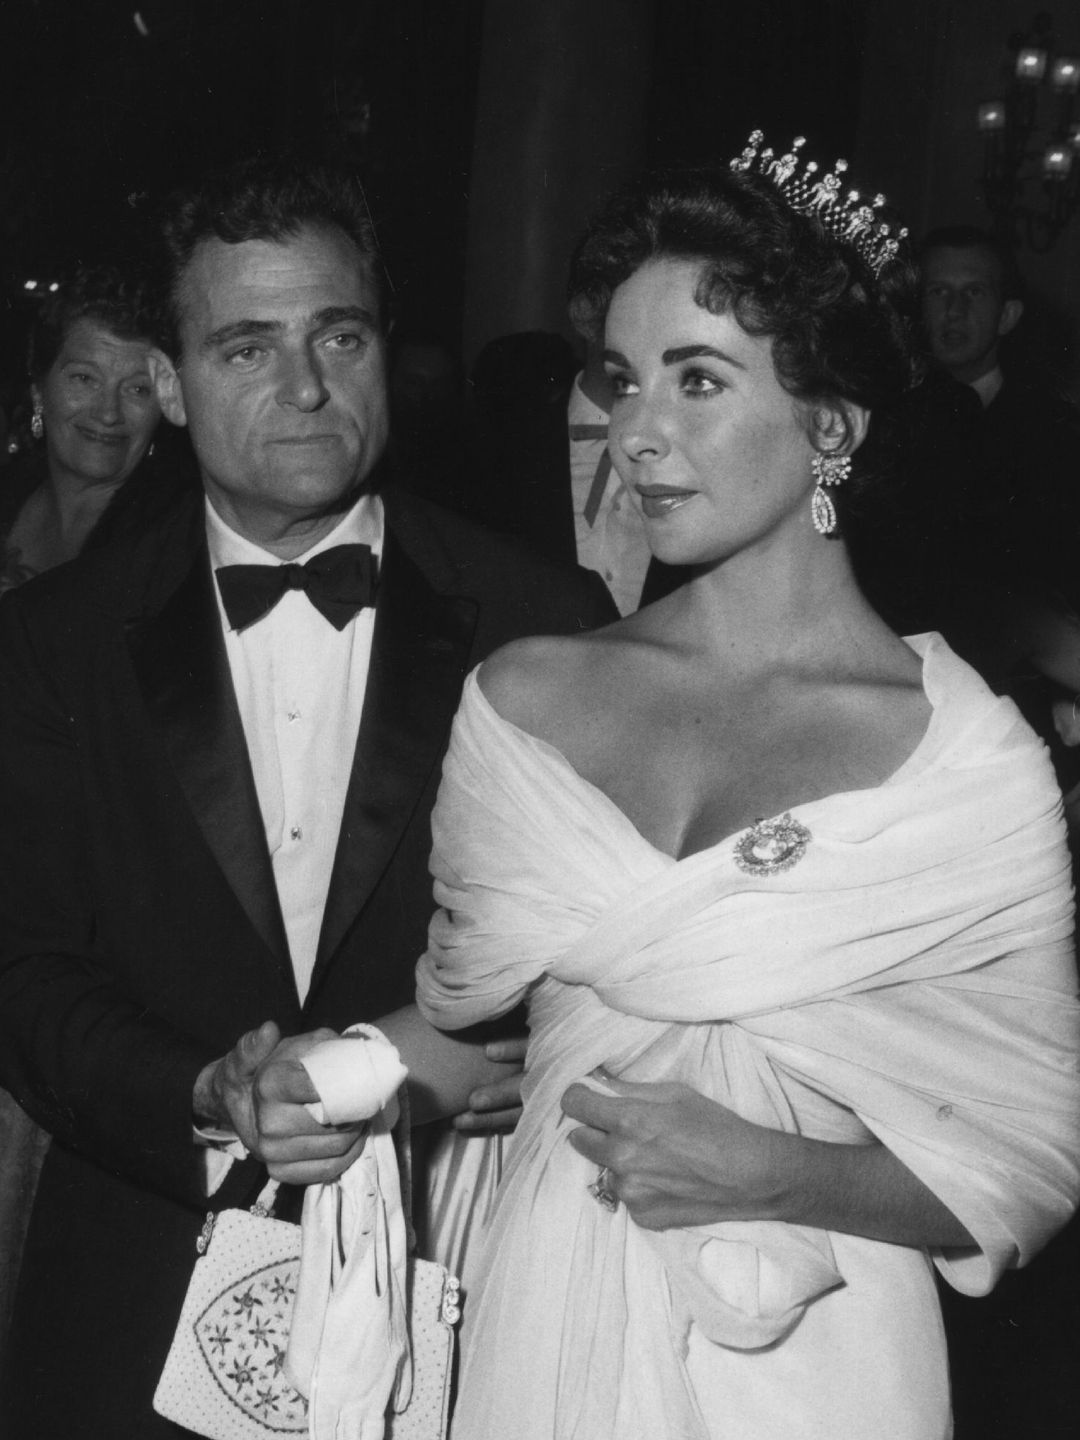 American actress Elizabeth Taylor with her husband, producer Mike Todd at the Cannes Film Festival